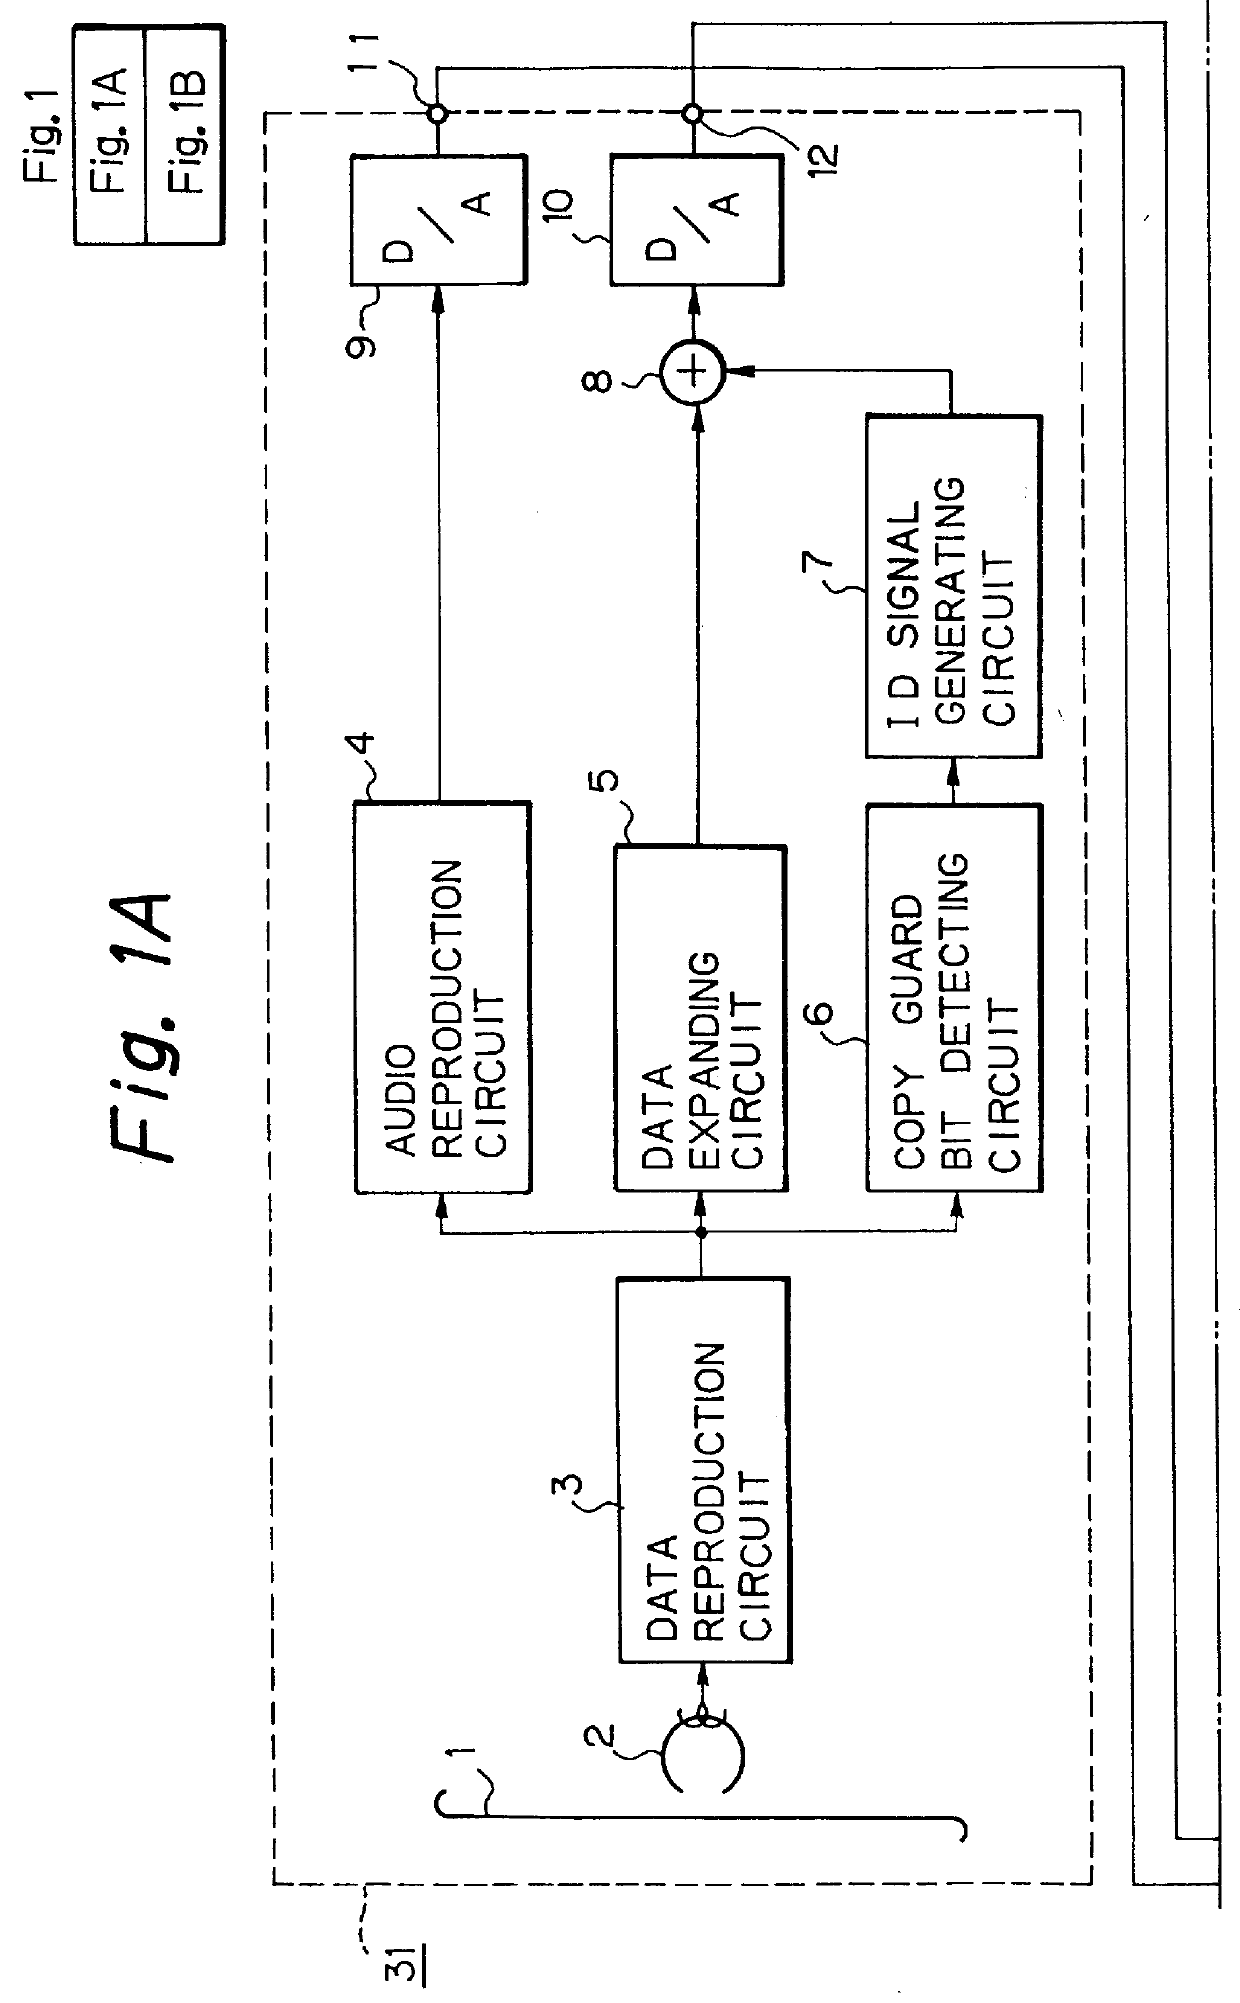 Apparatus and method for preventing unauthorized copying of video signals